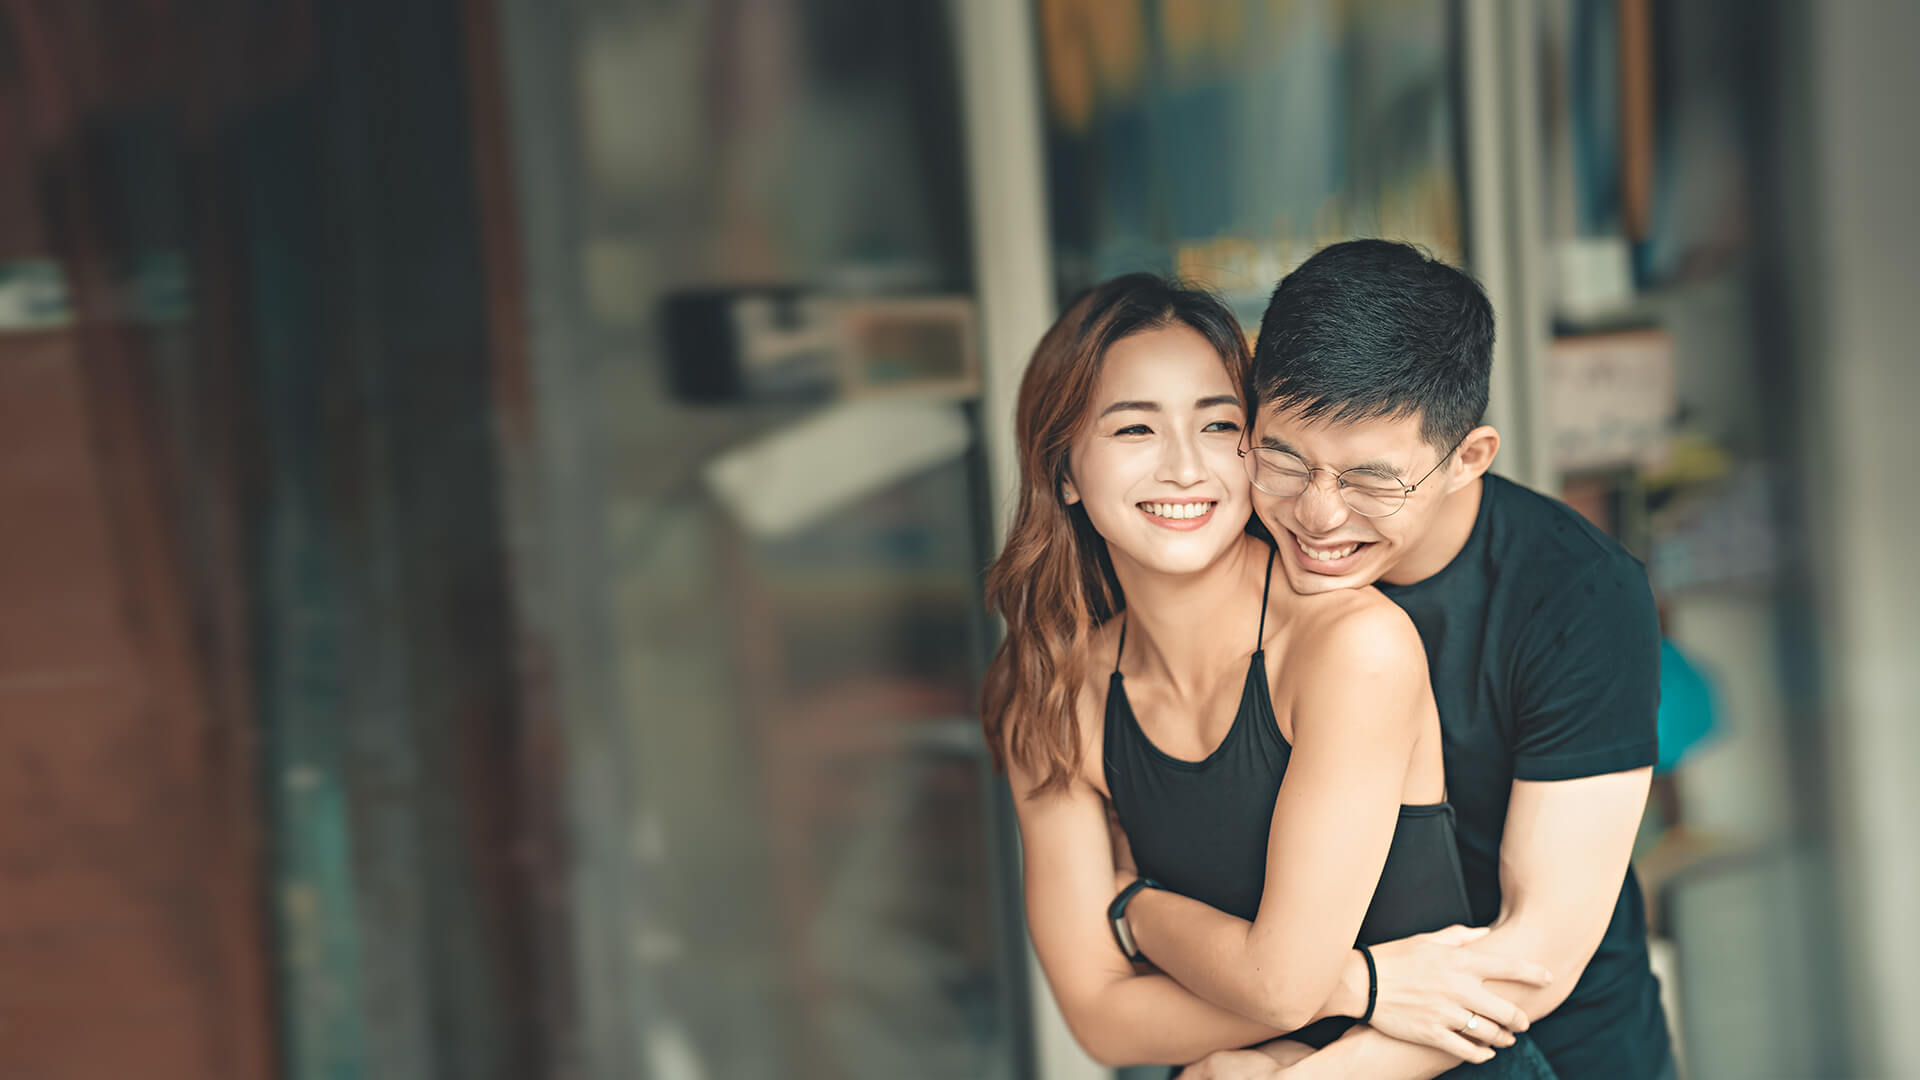 Asian Dating on eharmony - find Asian Singles near you!